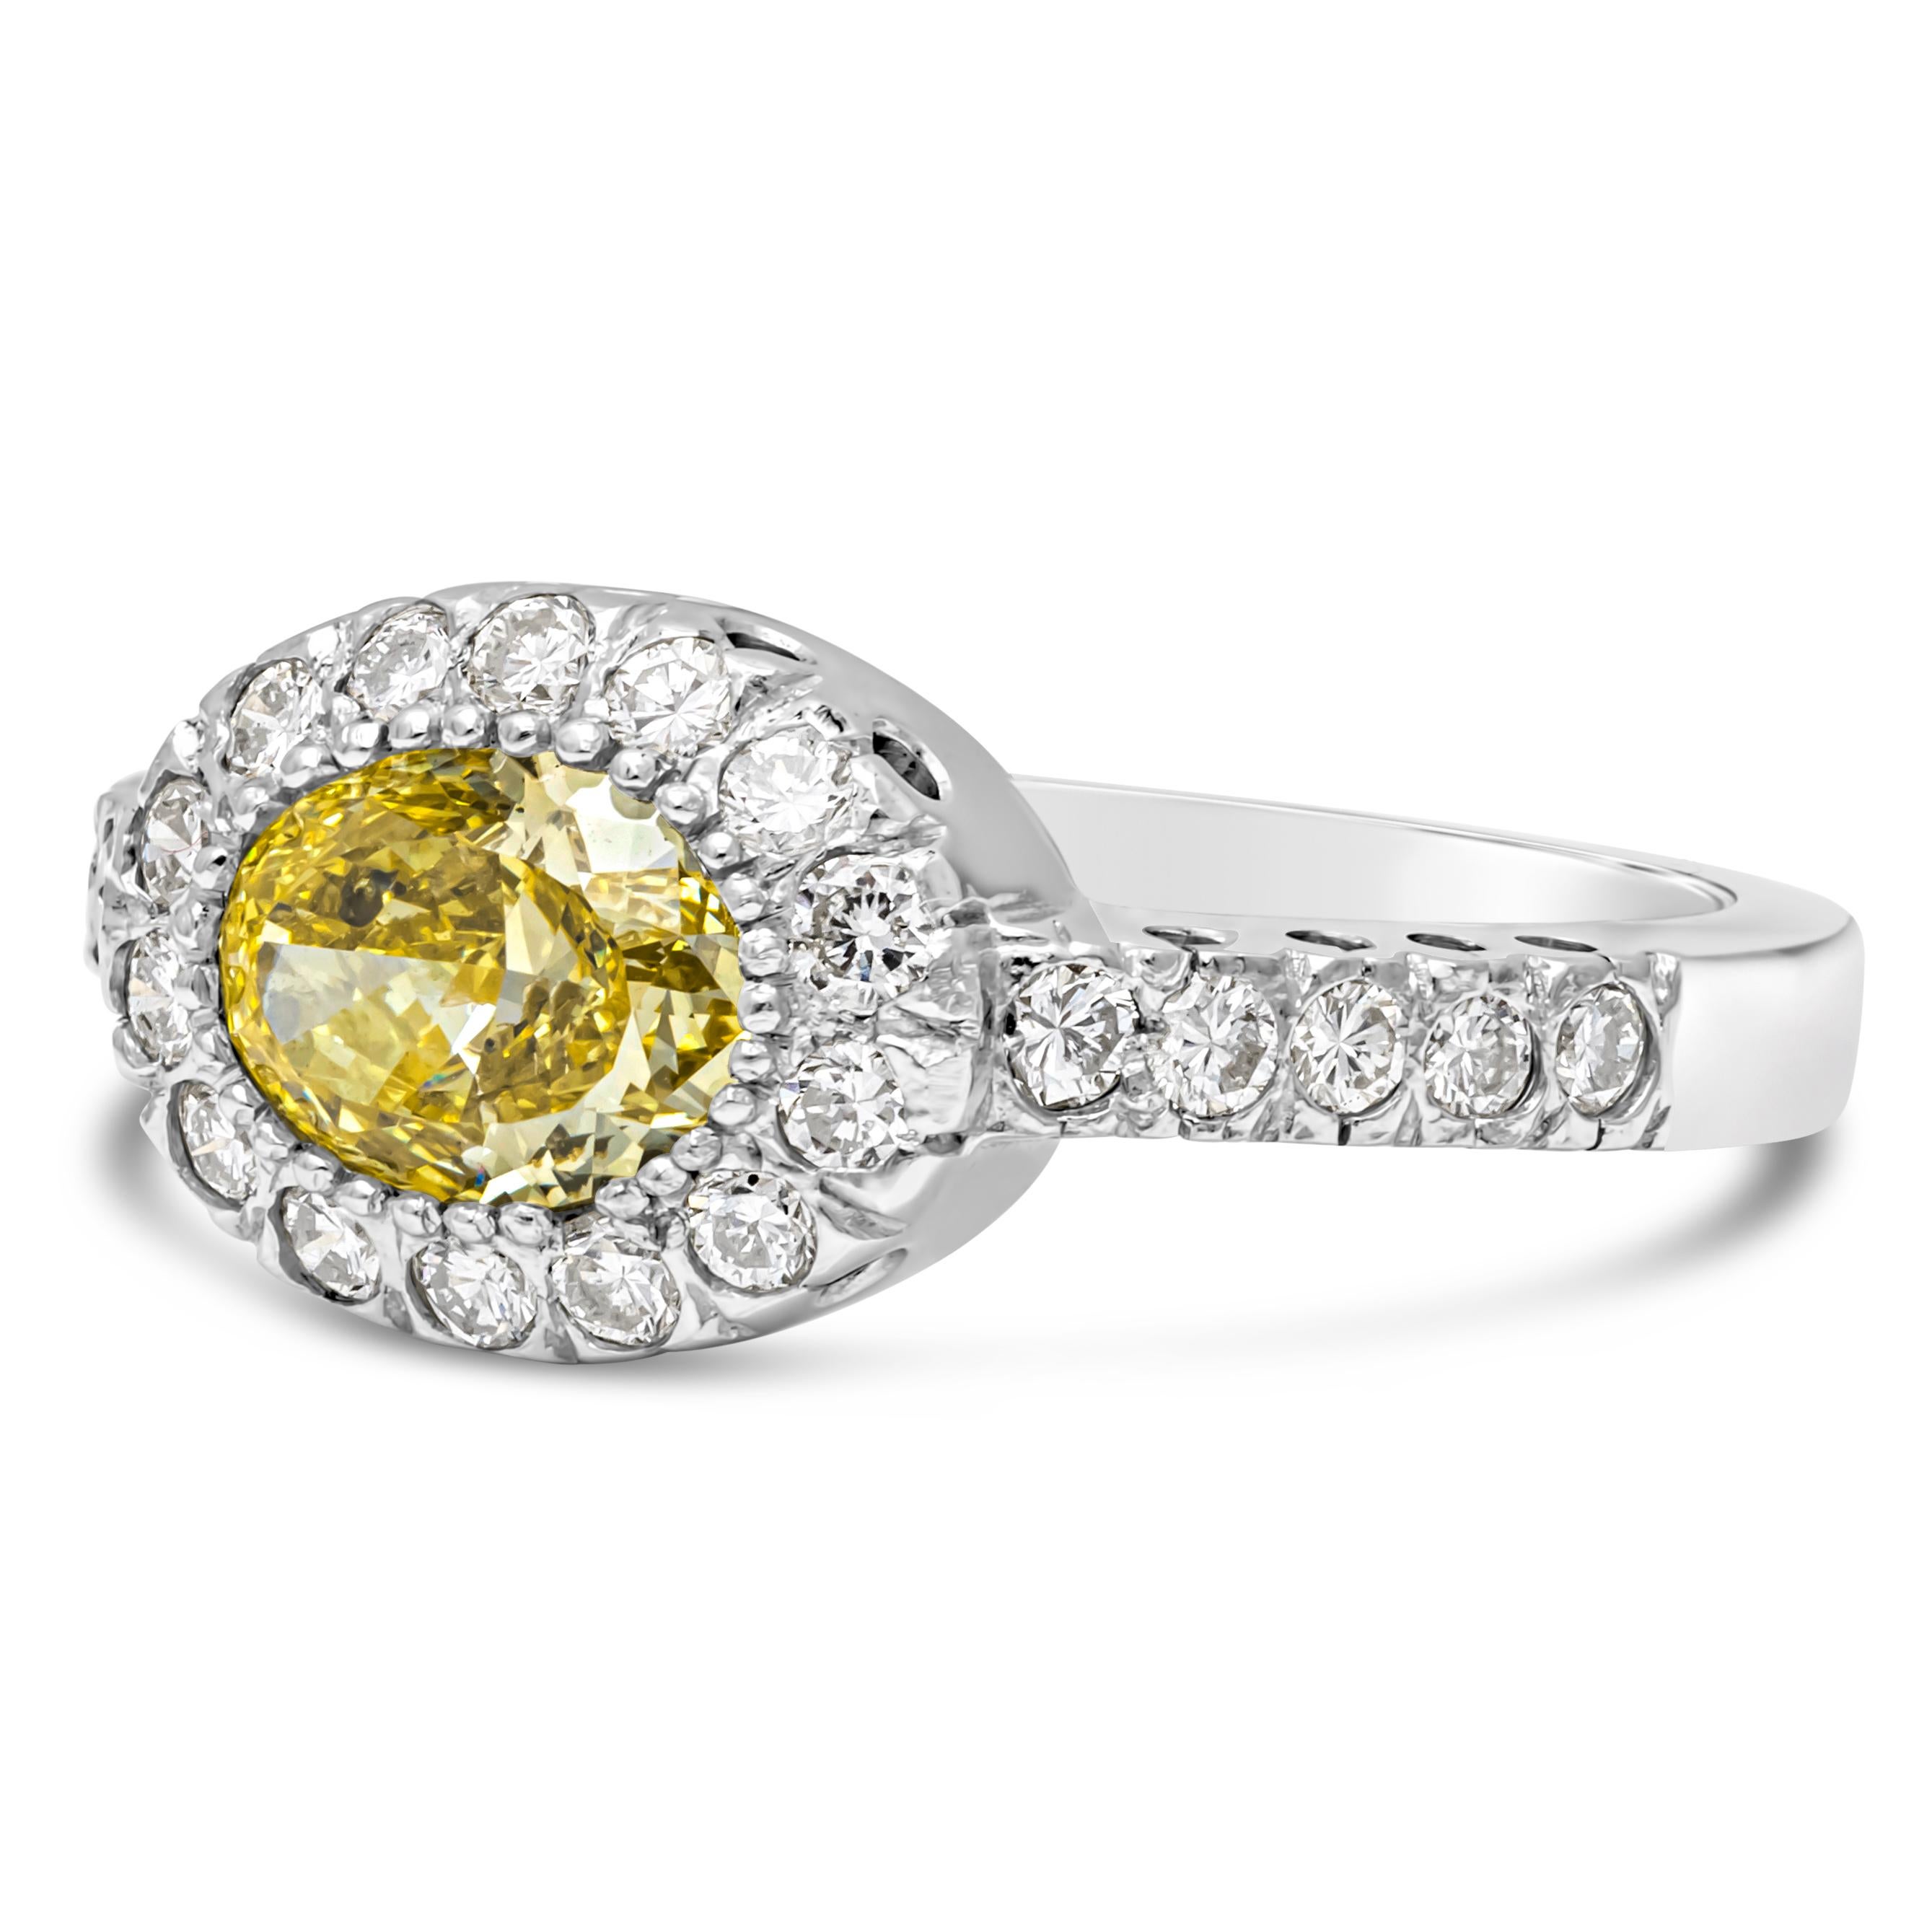 Contemporary GIA Certified 1.03 Carats Oval Cut Fancy Yellow Diamond Halo Engagement Ring For Sale